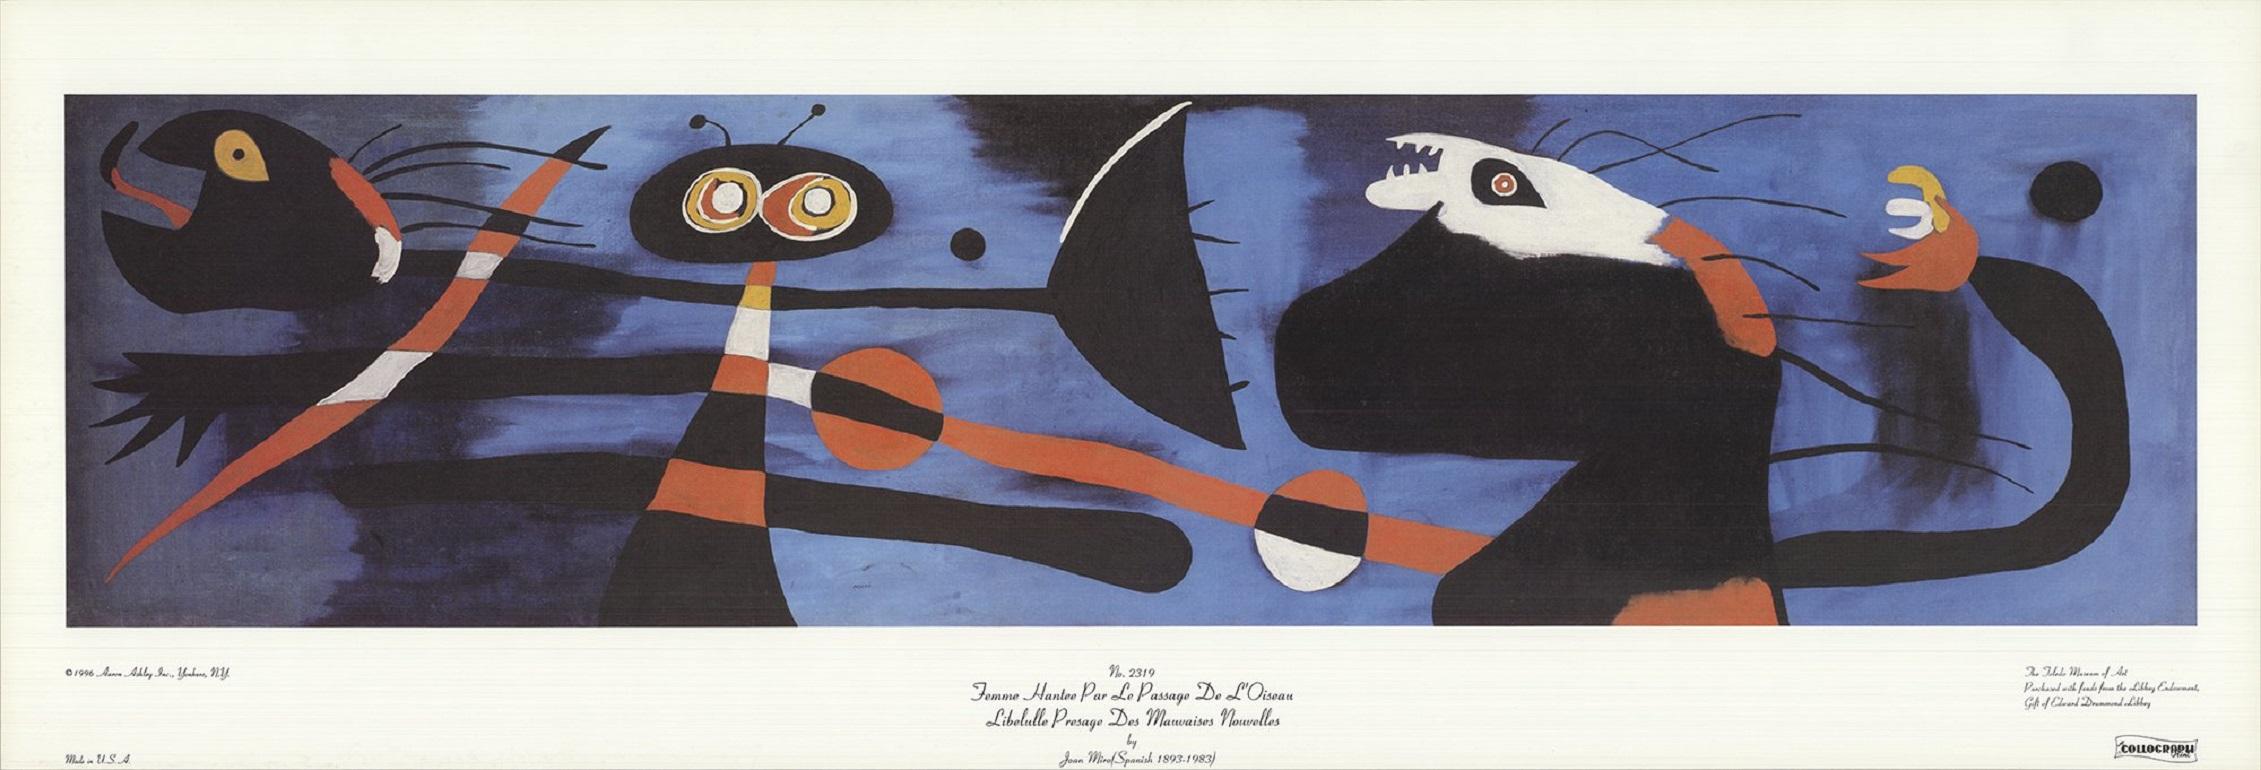 1996 After Joan Miro 'Mural I' Surrealism USA Offset Lithograph - Print by Joan Miró